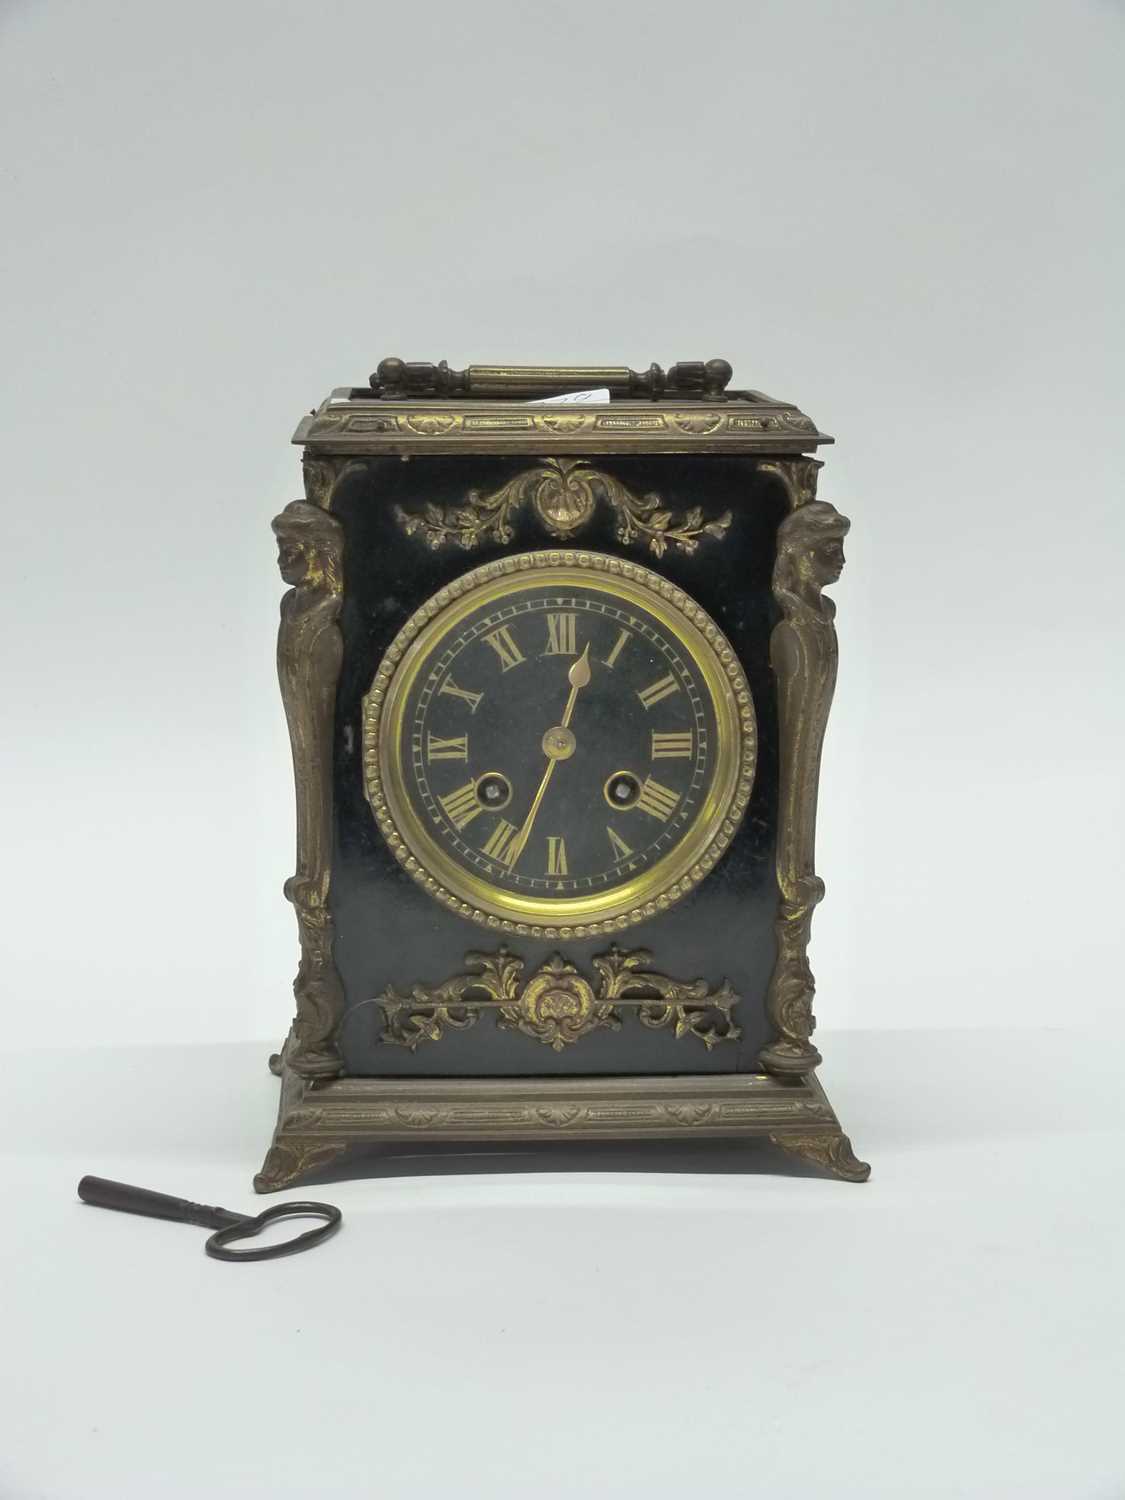 A 19th Century brass mantel clock, black ebonised wood with gilt brass decoration, 23cm high (with